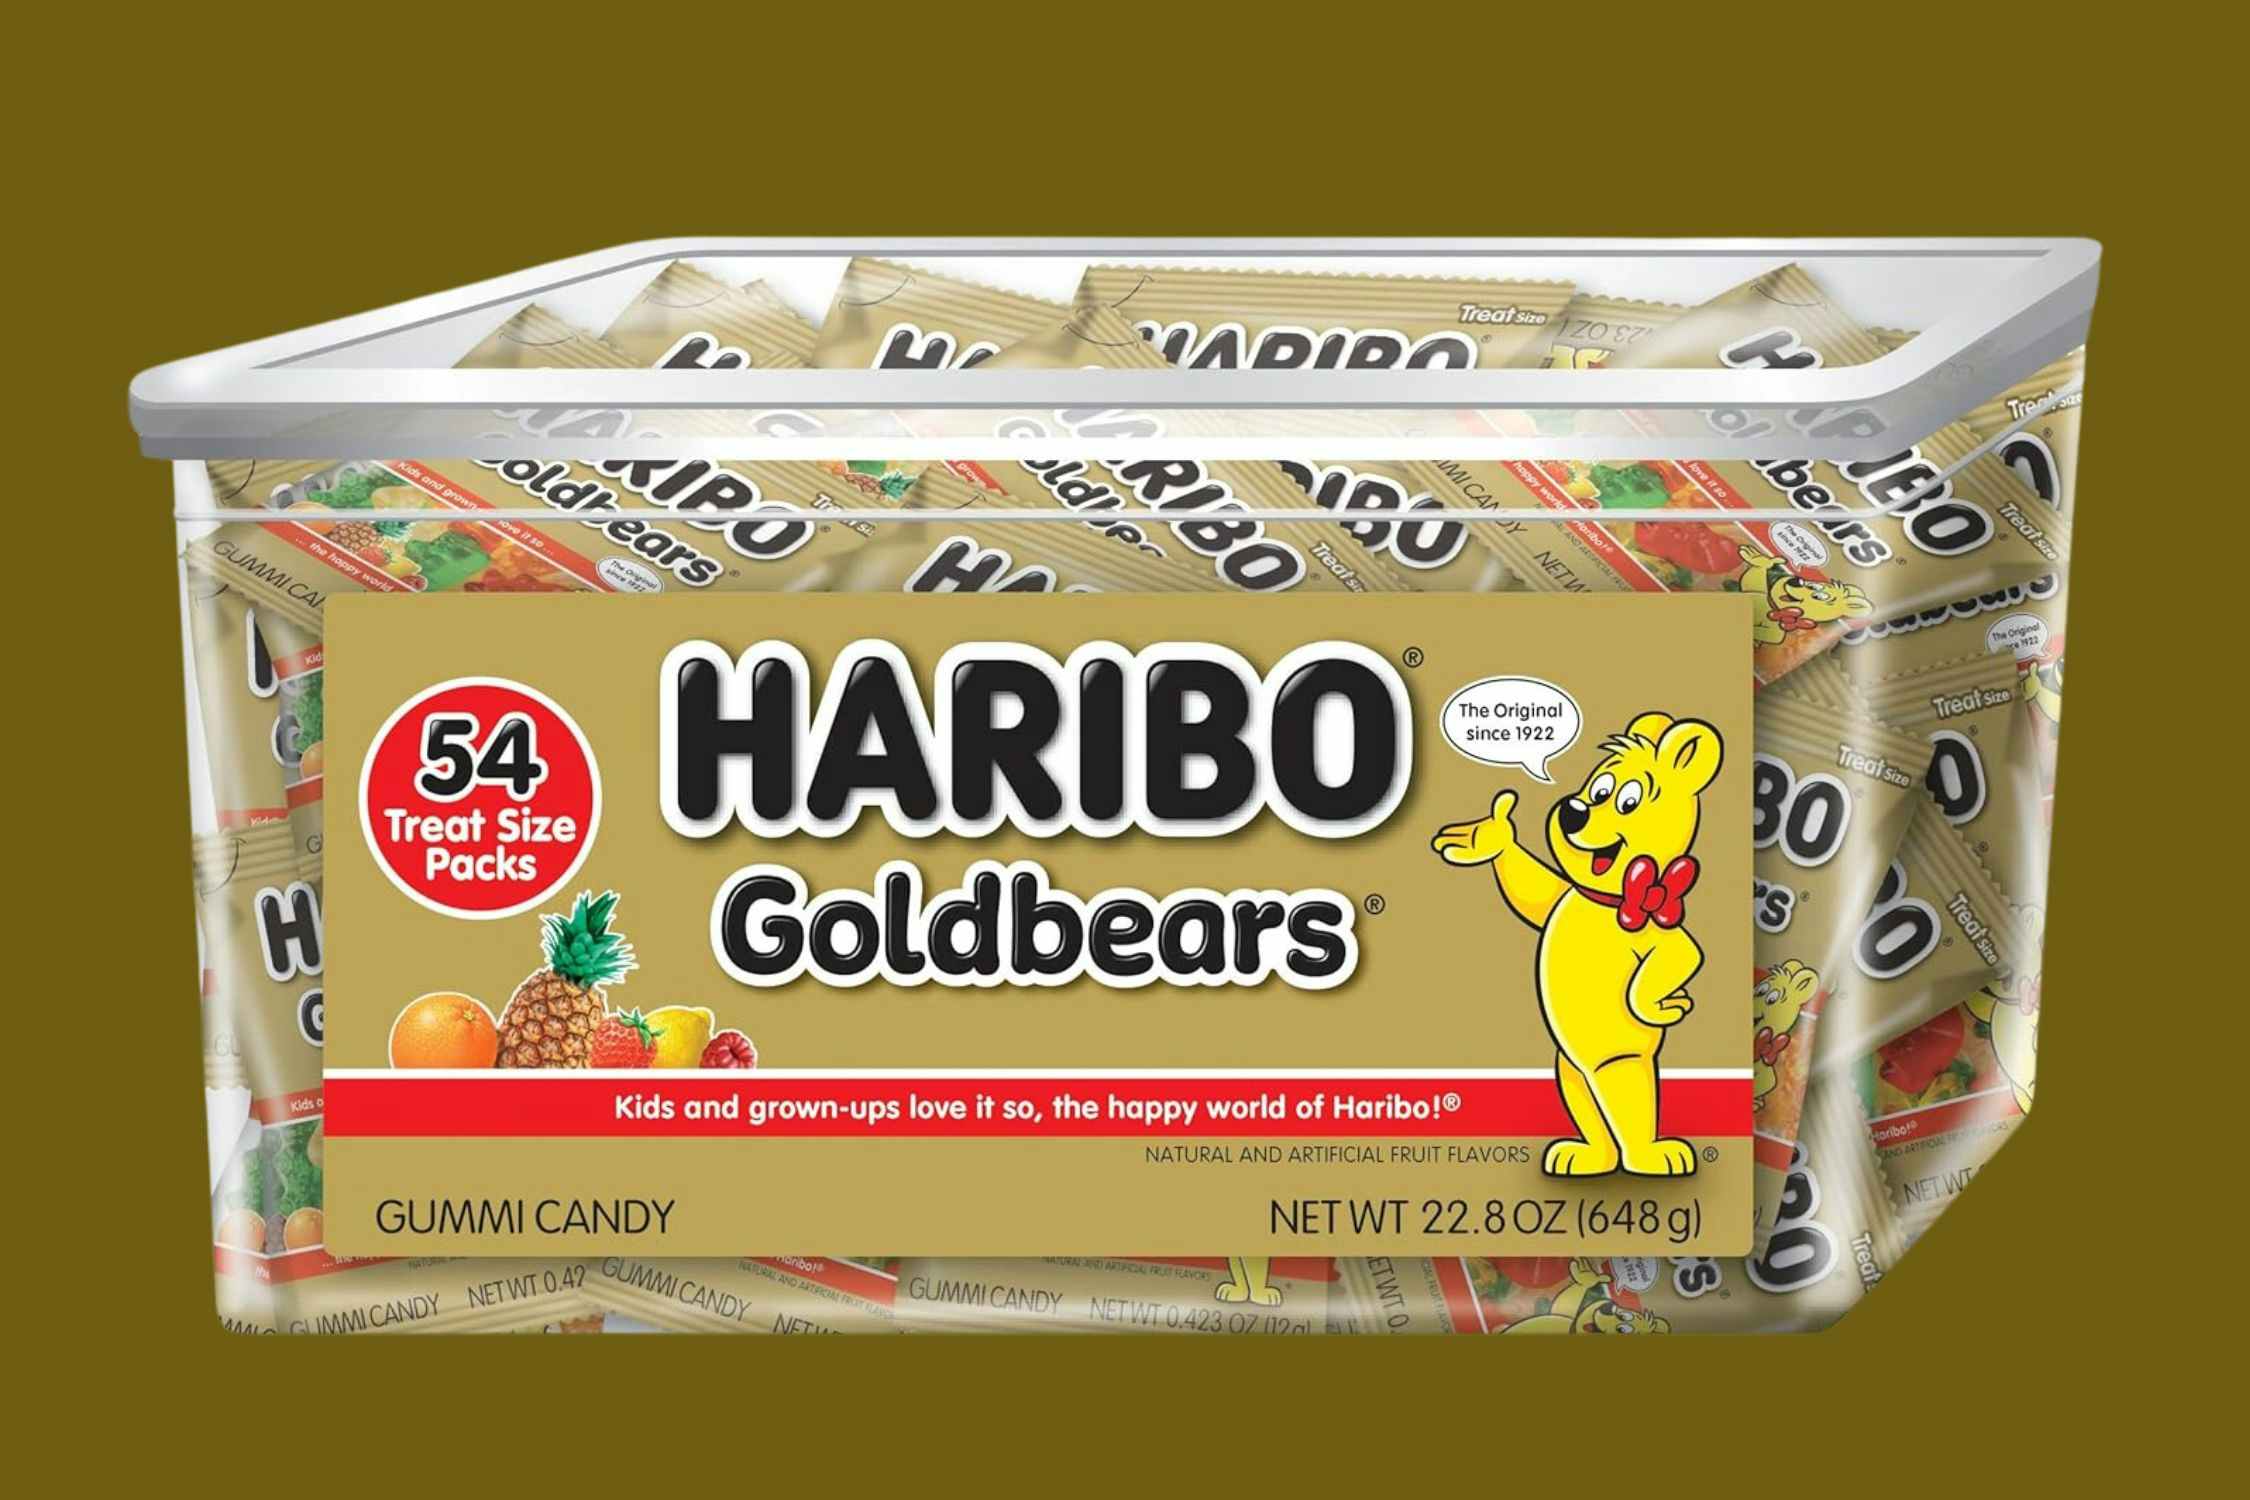 Haribo Gummy Bears: Get 54 Treat-Size Packs for as Low as $9.21 on Amazon